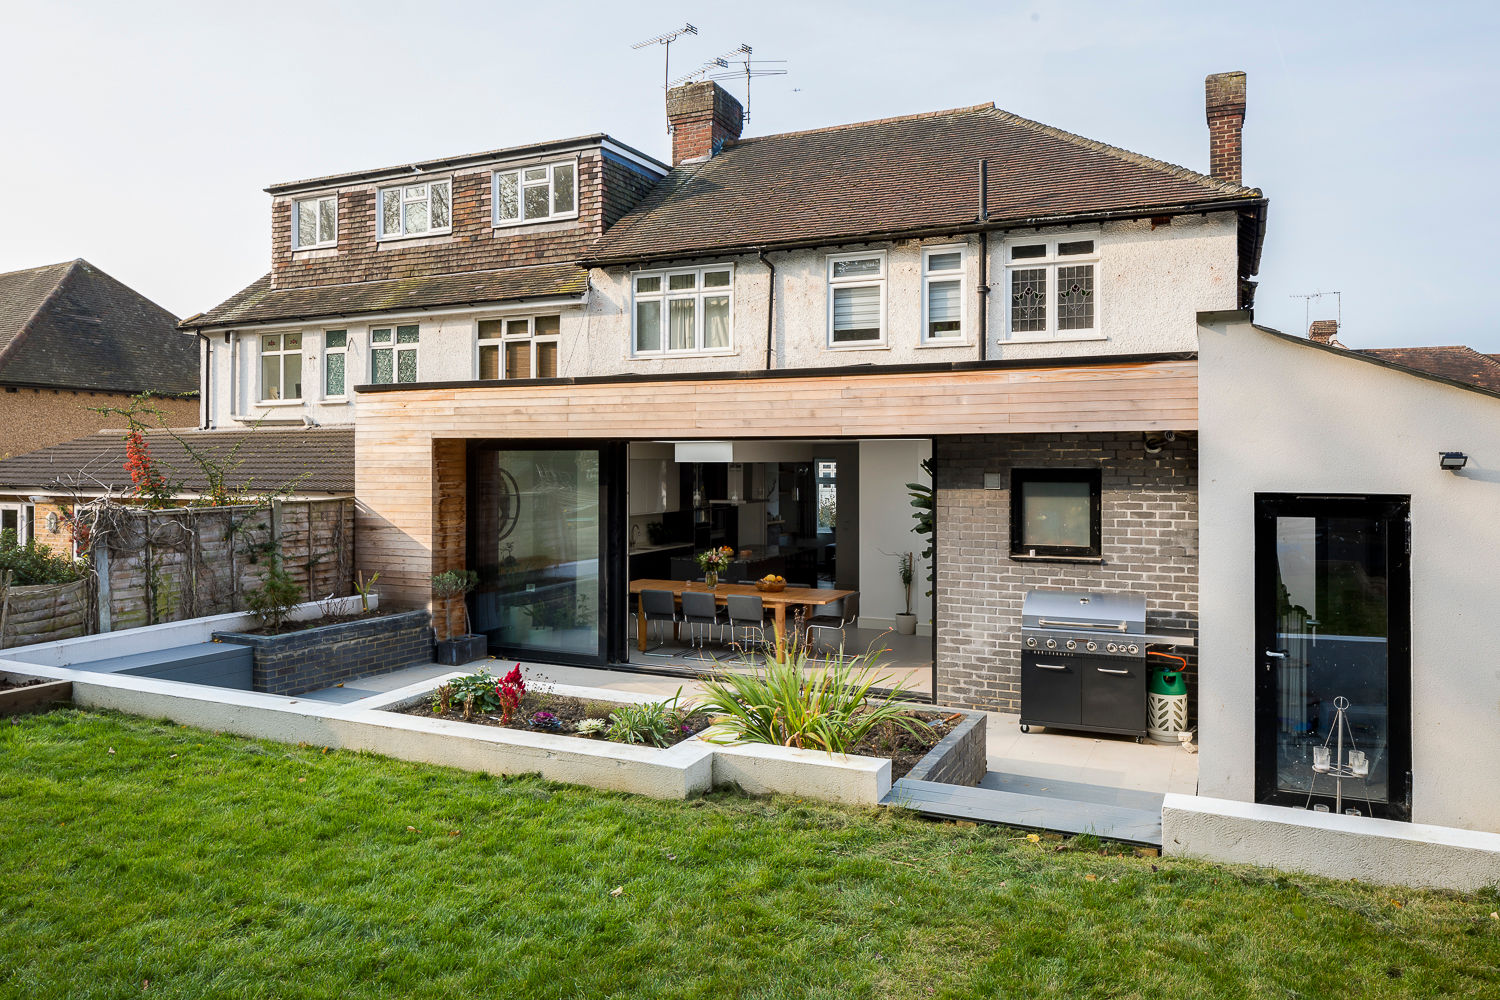 Large Rear Extension, Semi-detached House, Woodford Green, North-East London, Model Projects Ltd Model Projects Ltd Casas modernas model projects,timber cladding,planters,slidding doors